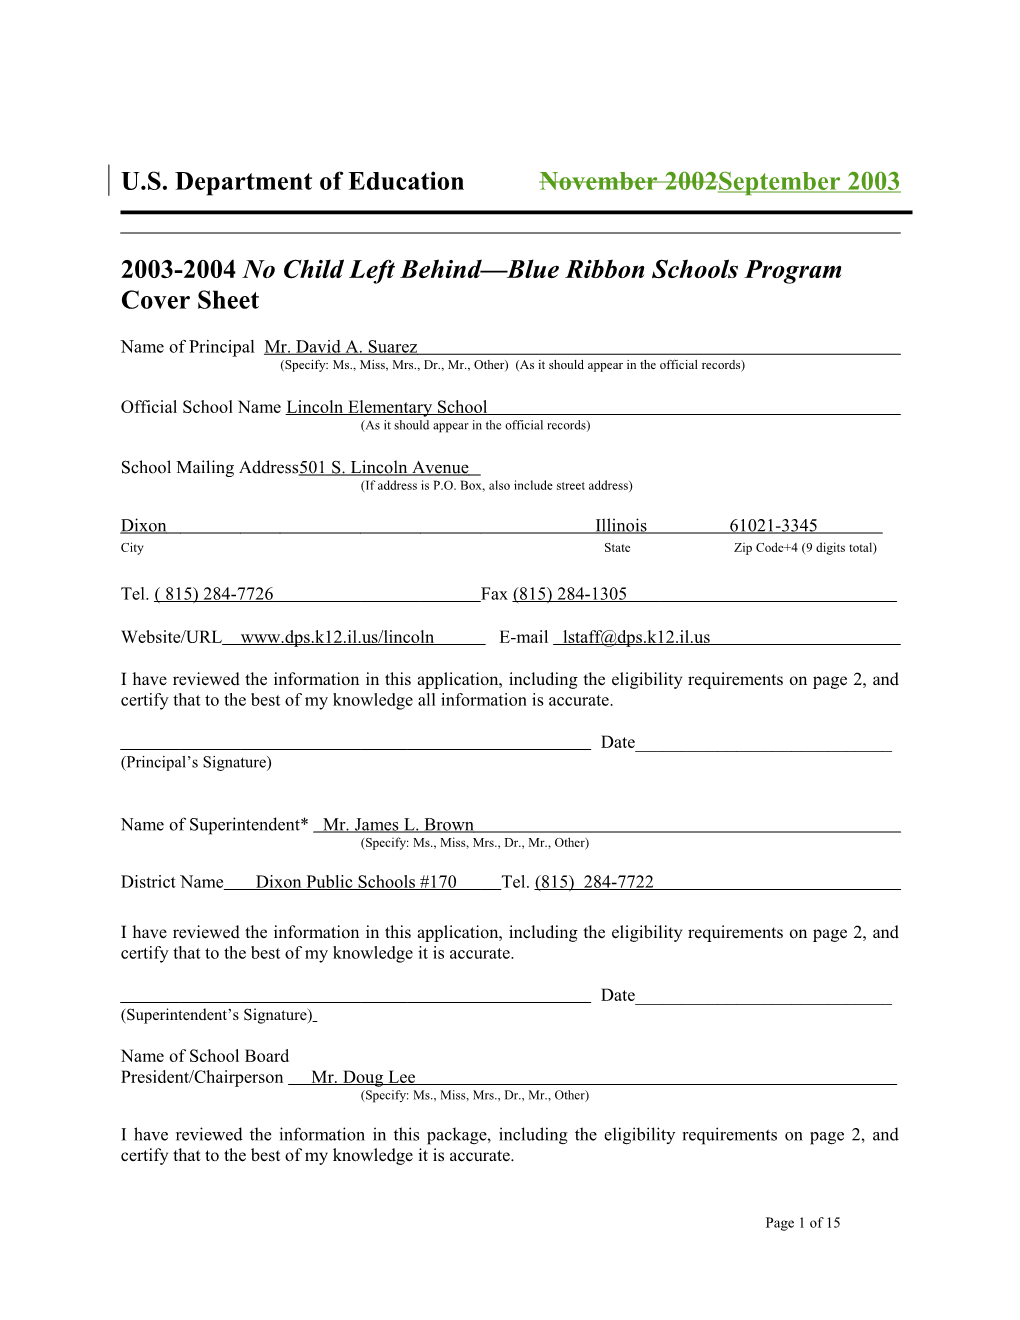 Lincoln Elementary School 2004 No Child Left Behind-Blue Ribbon School Application (Msword)